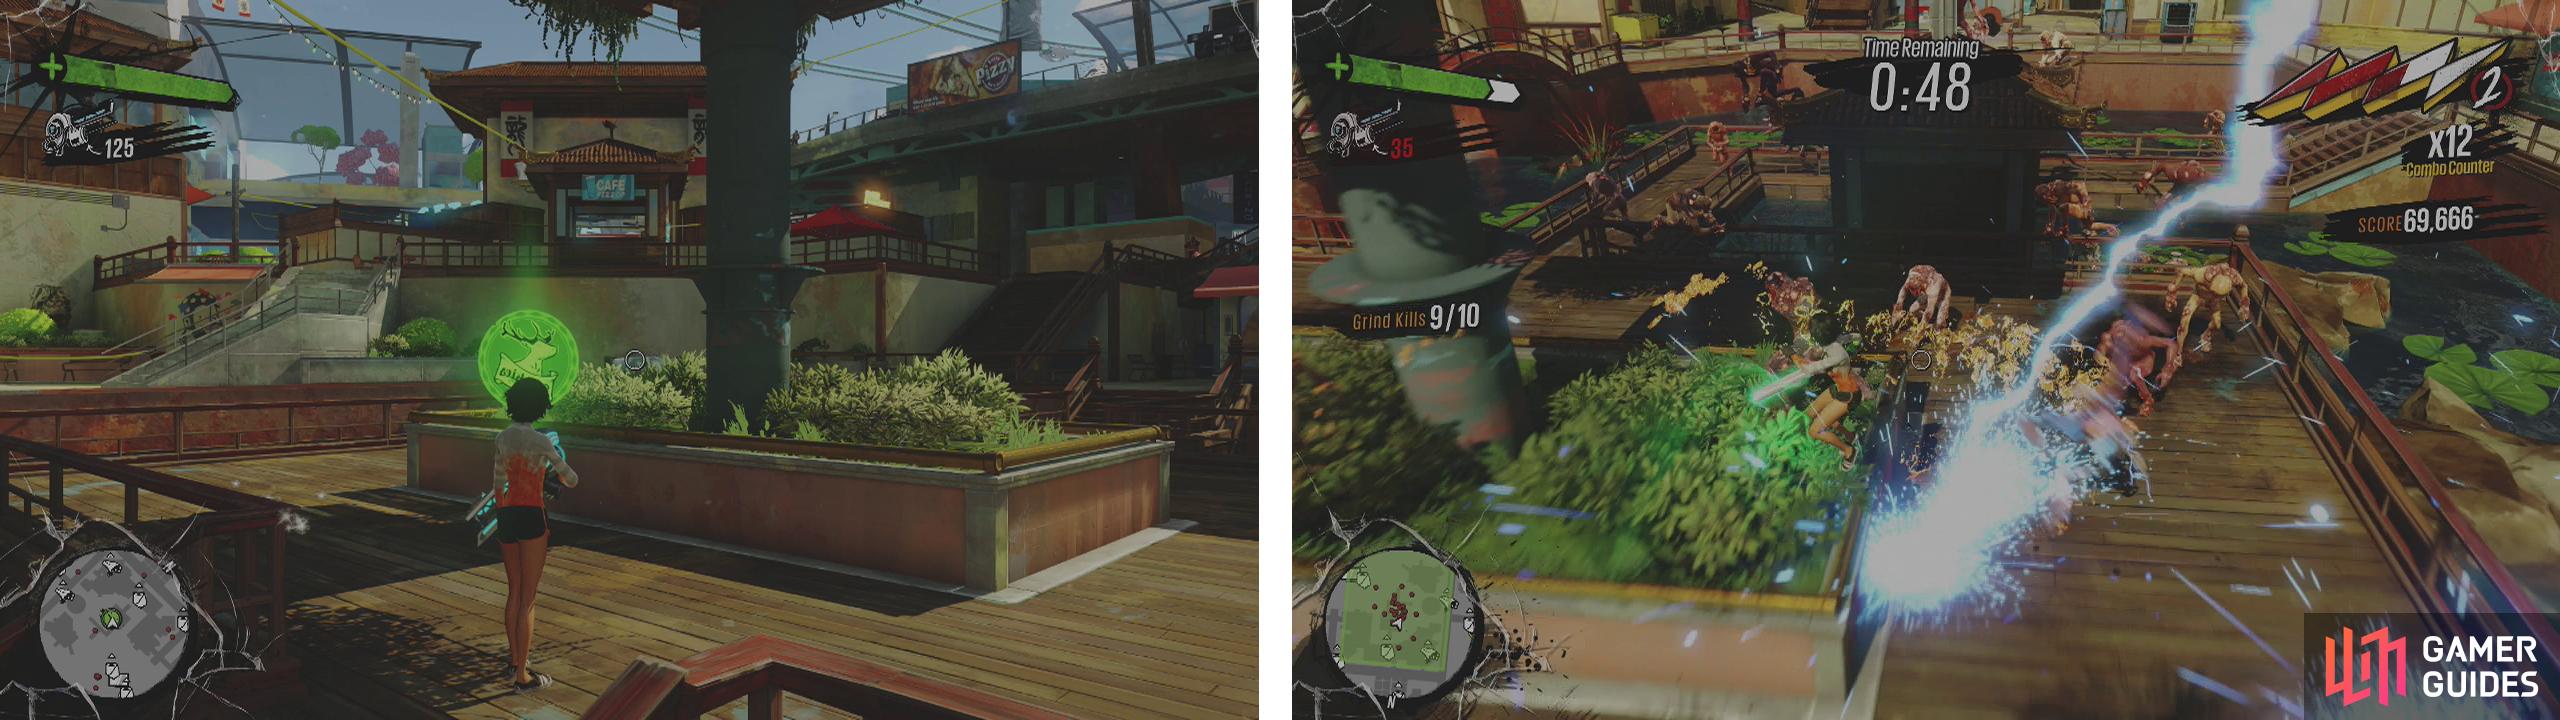 You can start the mission here (left). Grind around the central platform and melee attack constantly to build a large combo (right).